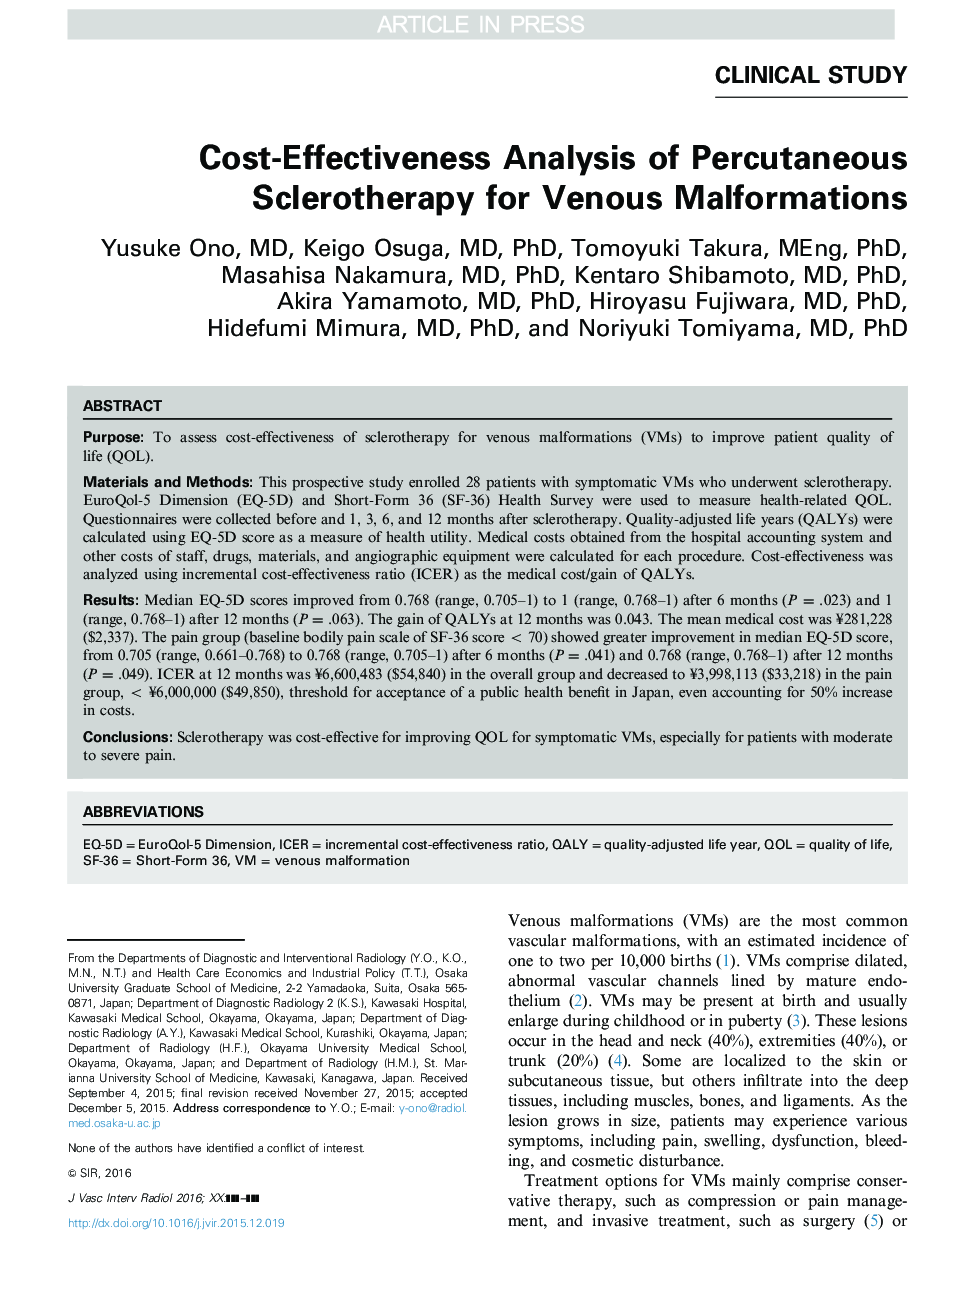 Cost-Effectiveness Analysis of Percutaneous Sclerotherapy for Venous Malformations